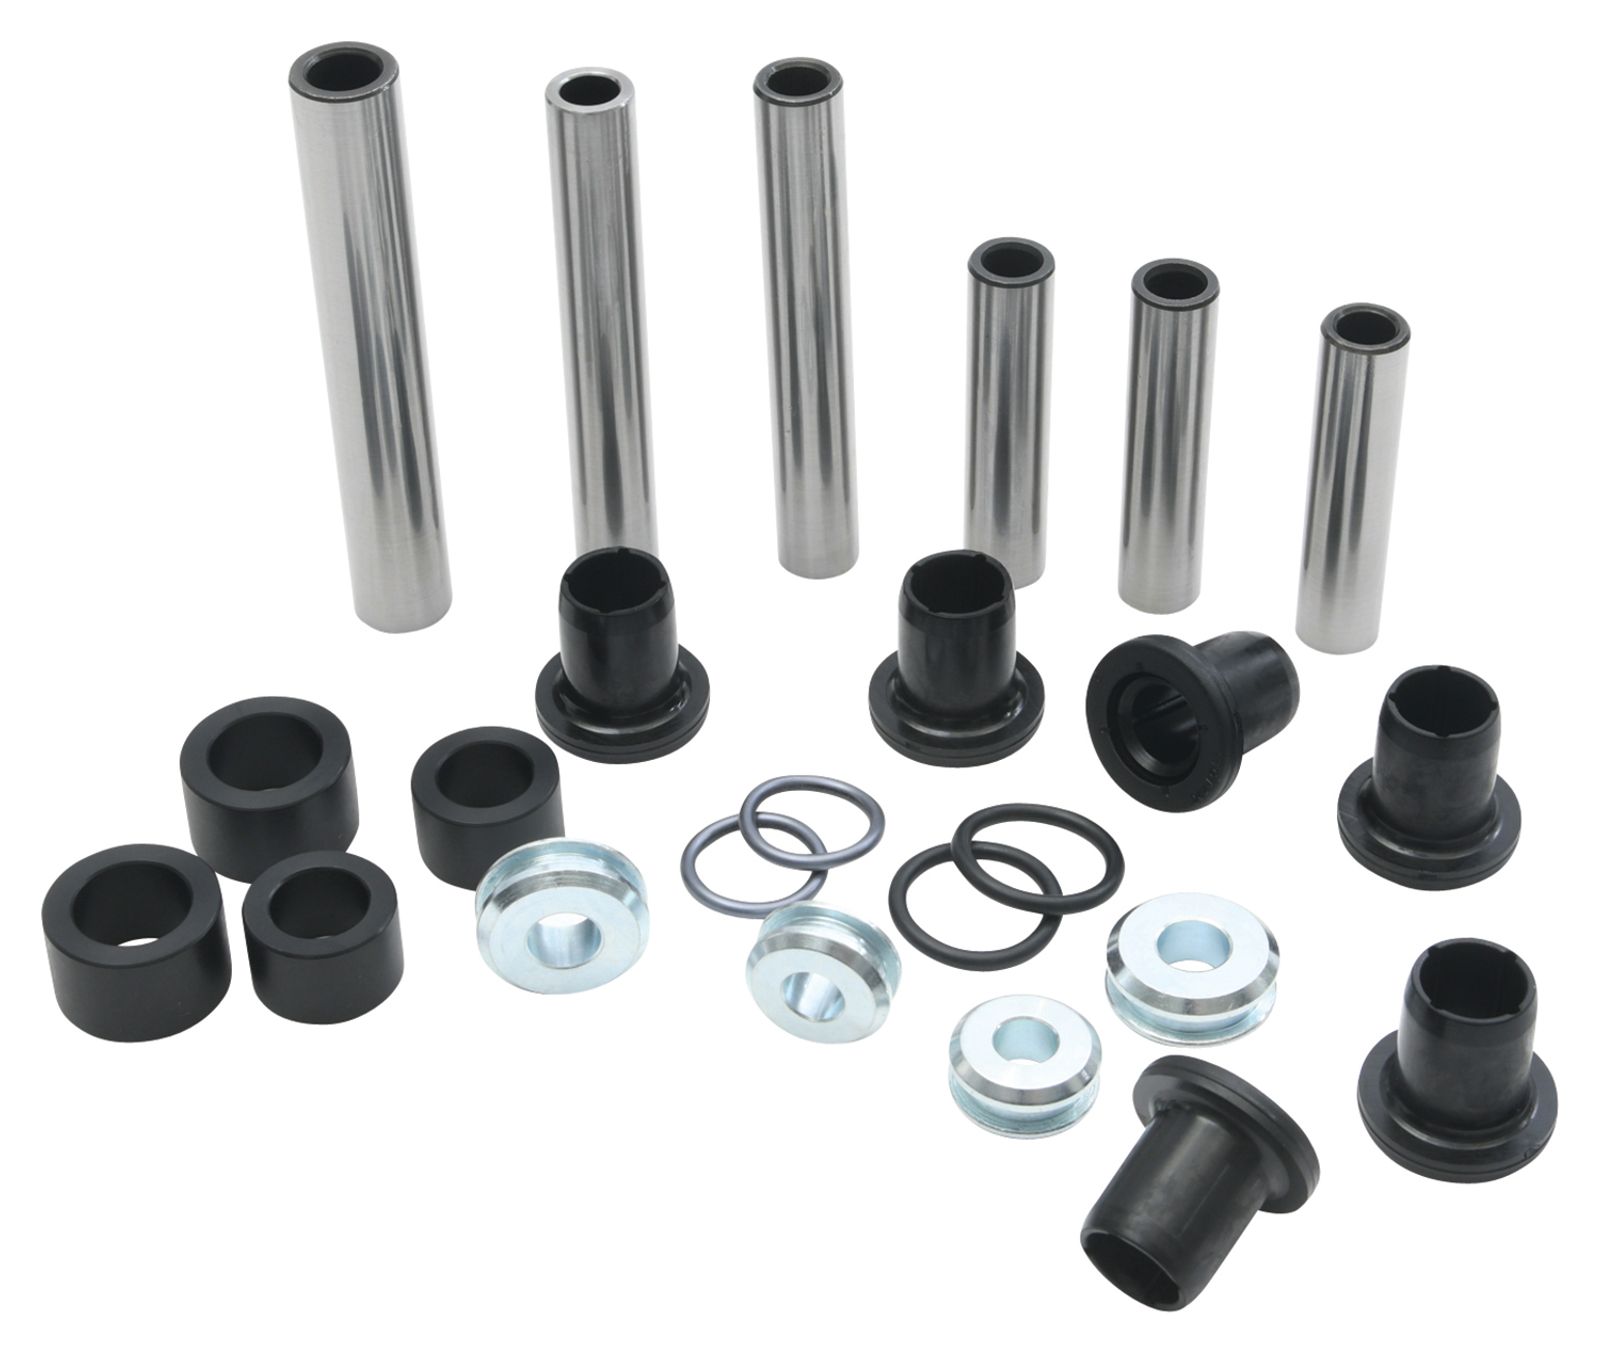 Wrp Rear Ind. Suspension Kits - WRP501169 image